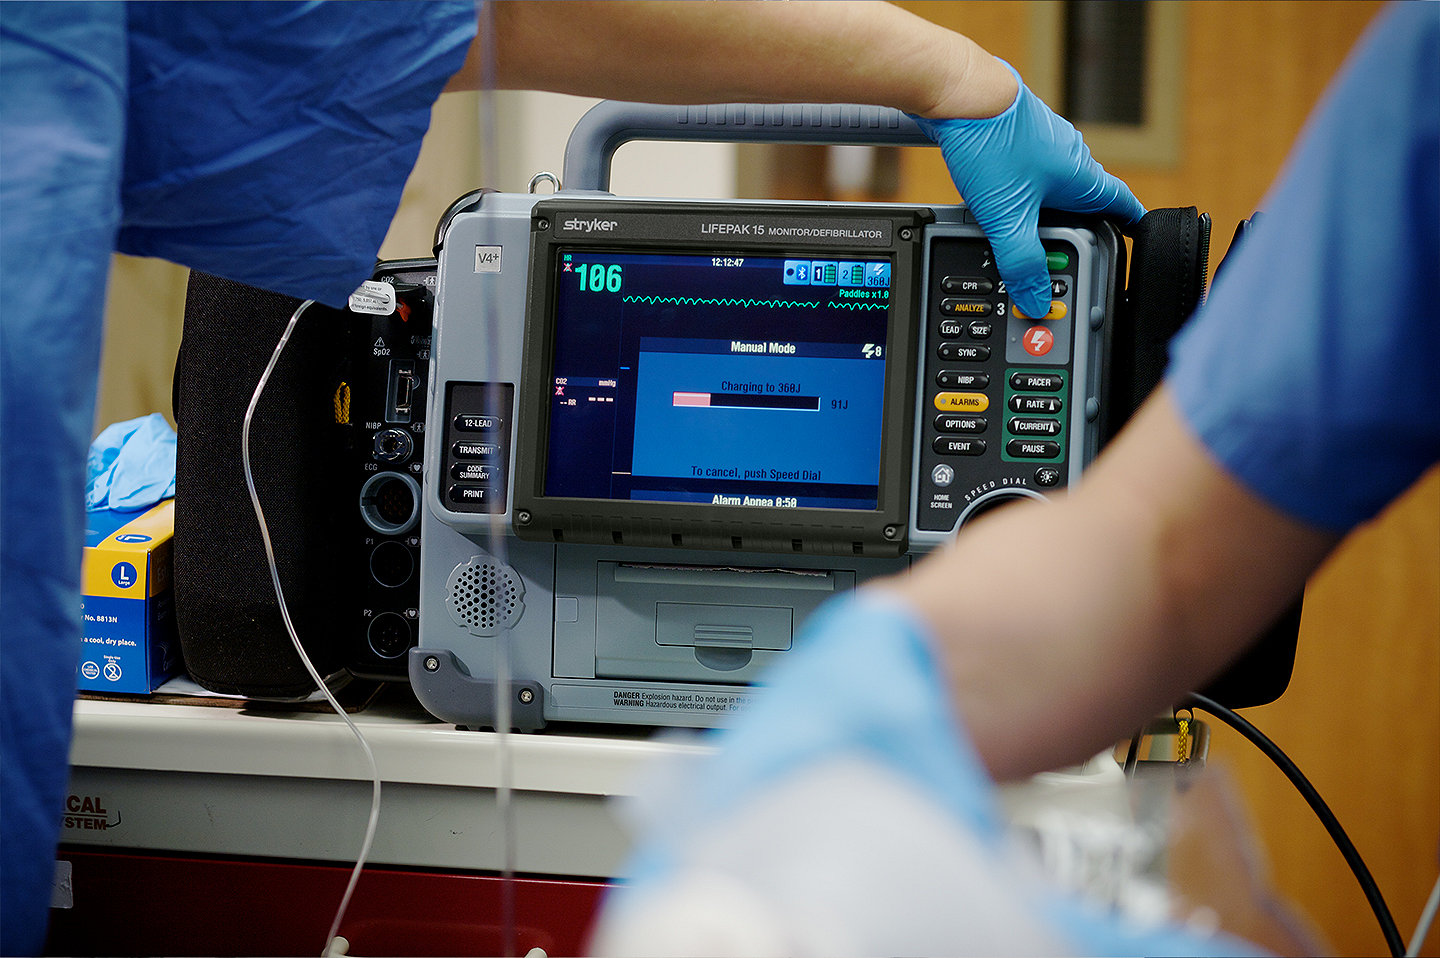 A nurse is using the LIFEPAK 15 V4+ monitor/defibrillator on a patient in the emergency room